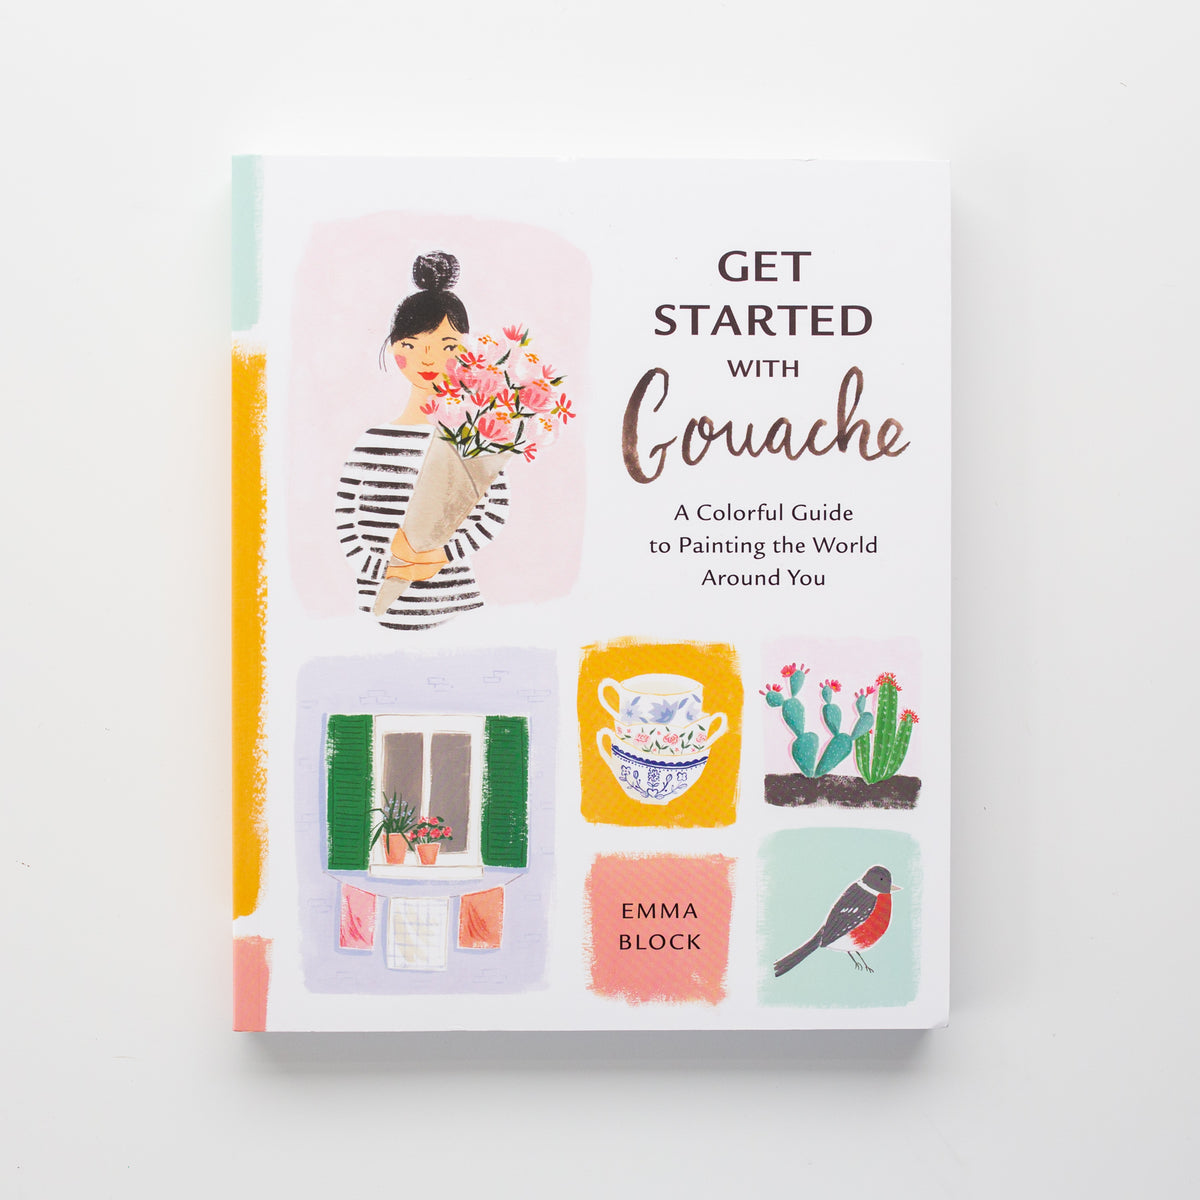 Get Started with Gouache' by Emma Block